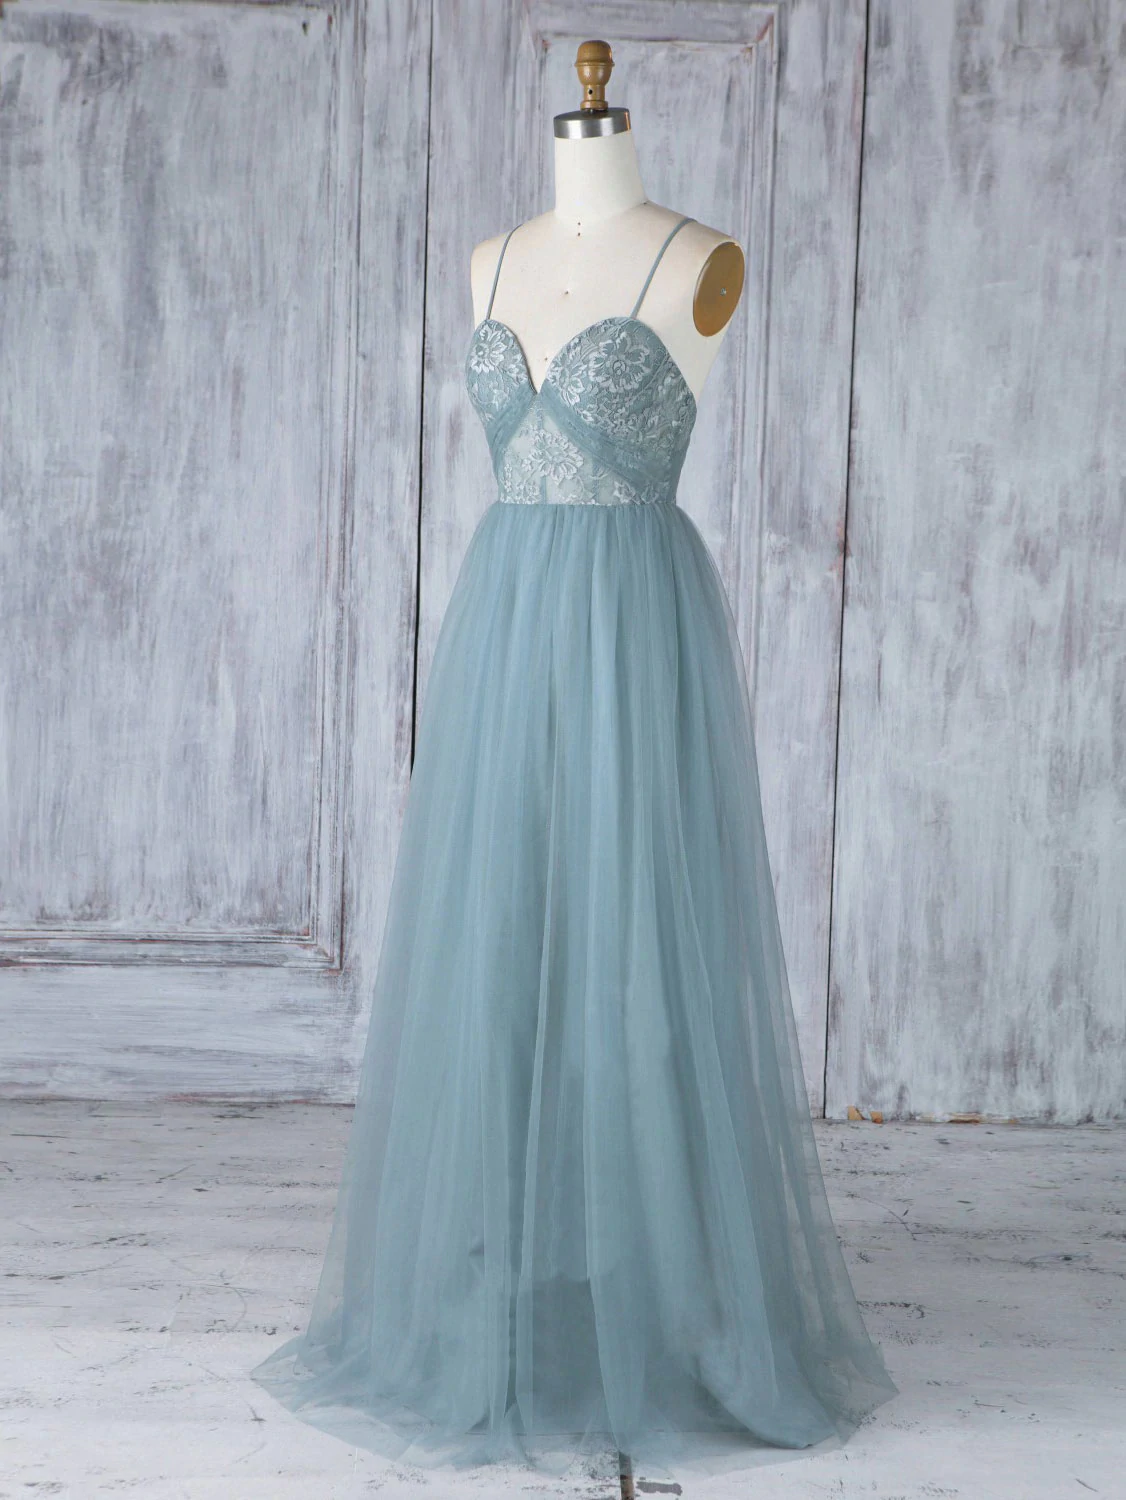 Simple Sweetheart Neck Tulle Lace Long Prom Dress, Green Evening Dress Bridedsmaid Dress